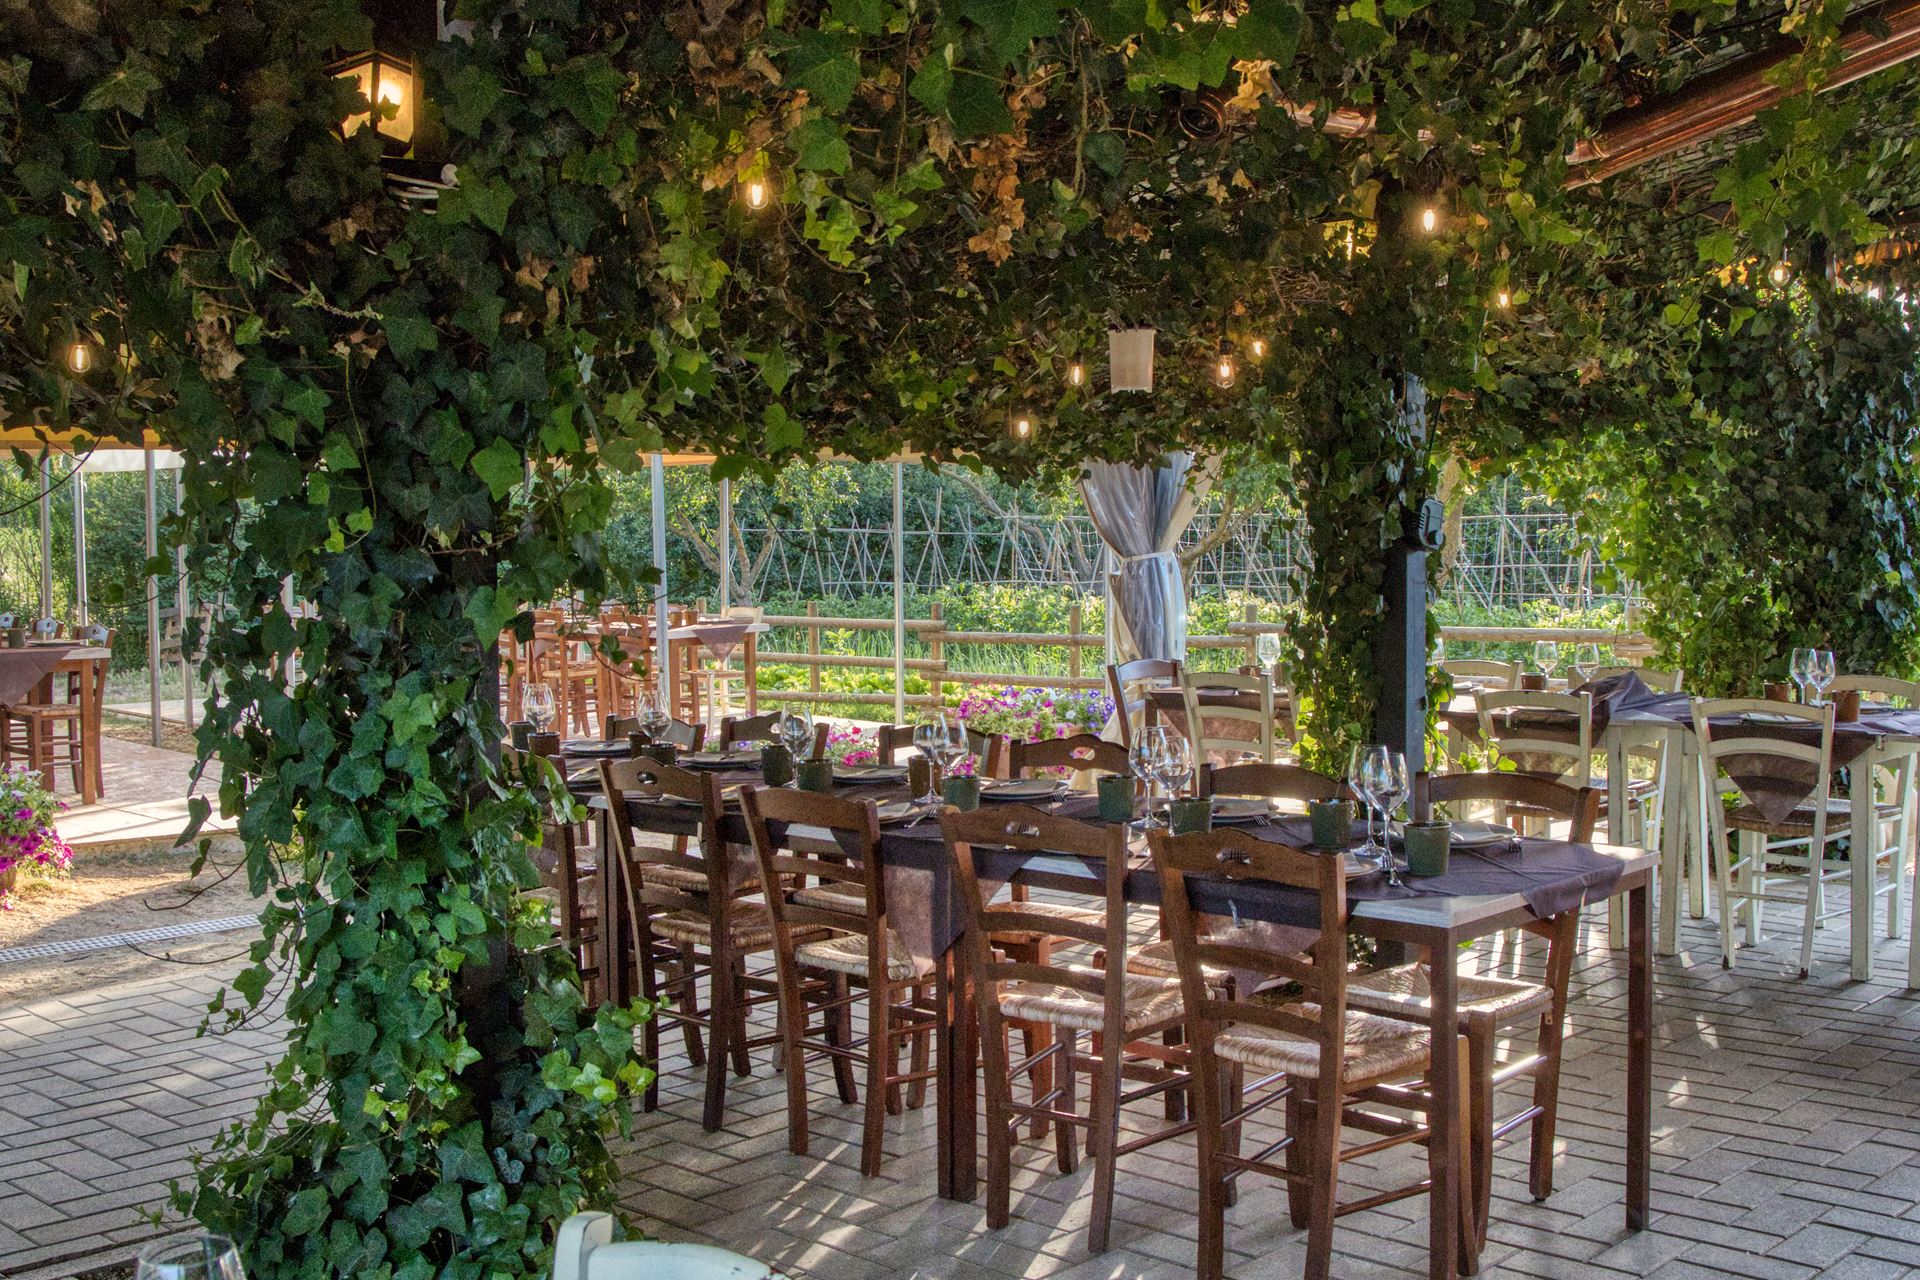 The restaurant with traditional umbrian dishes near Lake Trasimeno